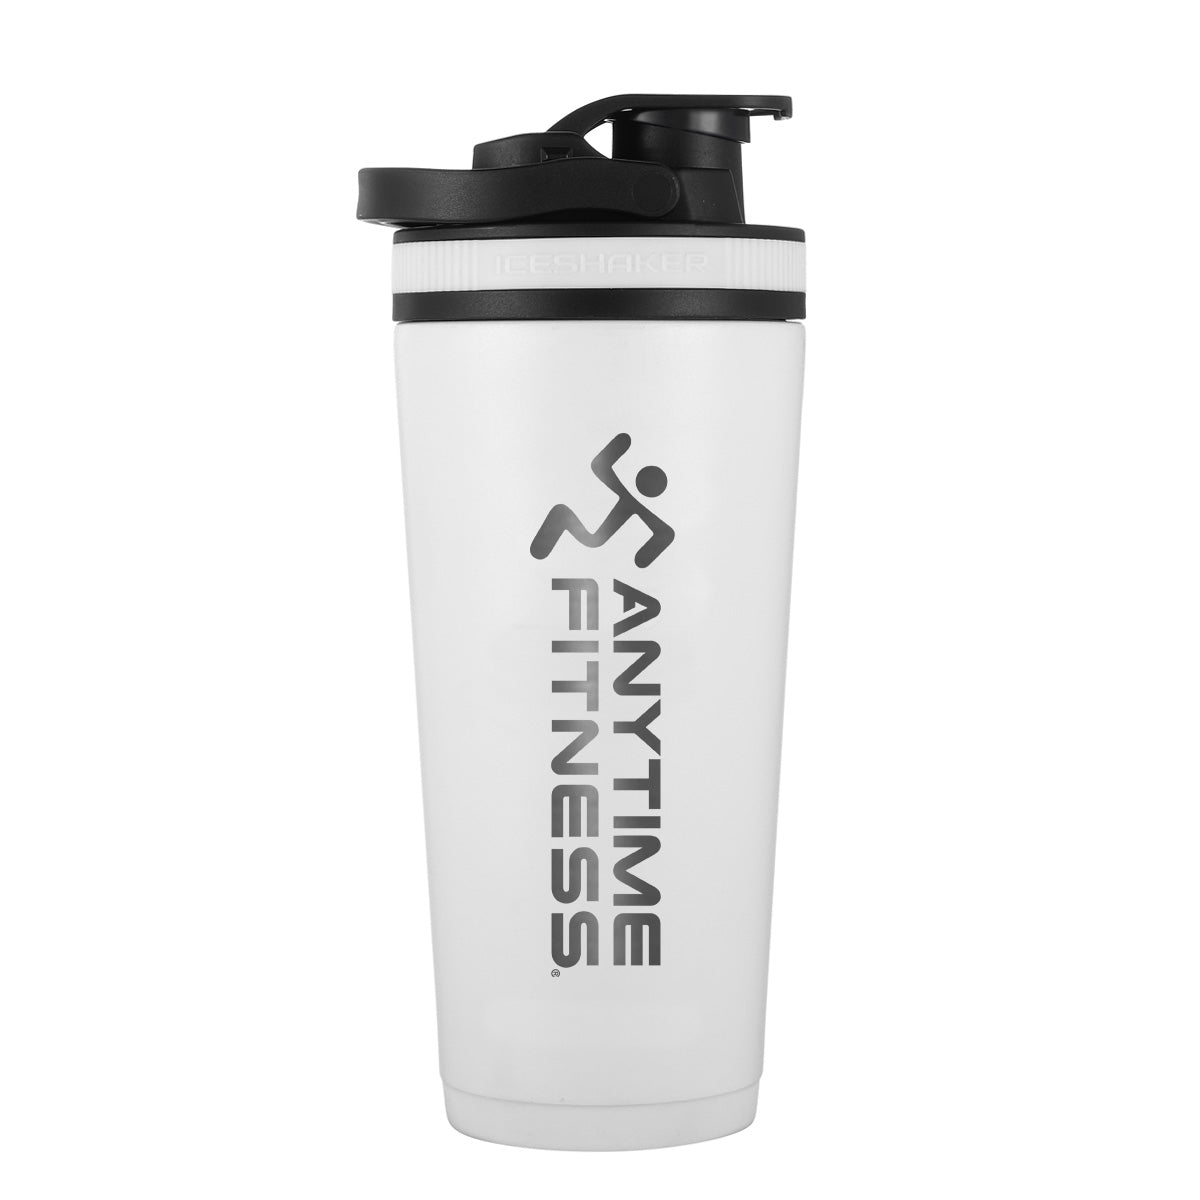 Check Out My New Steel Shaker Bottle #fitnesslifestyle